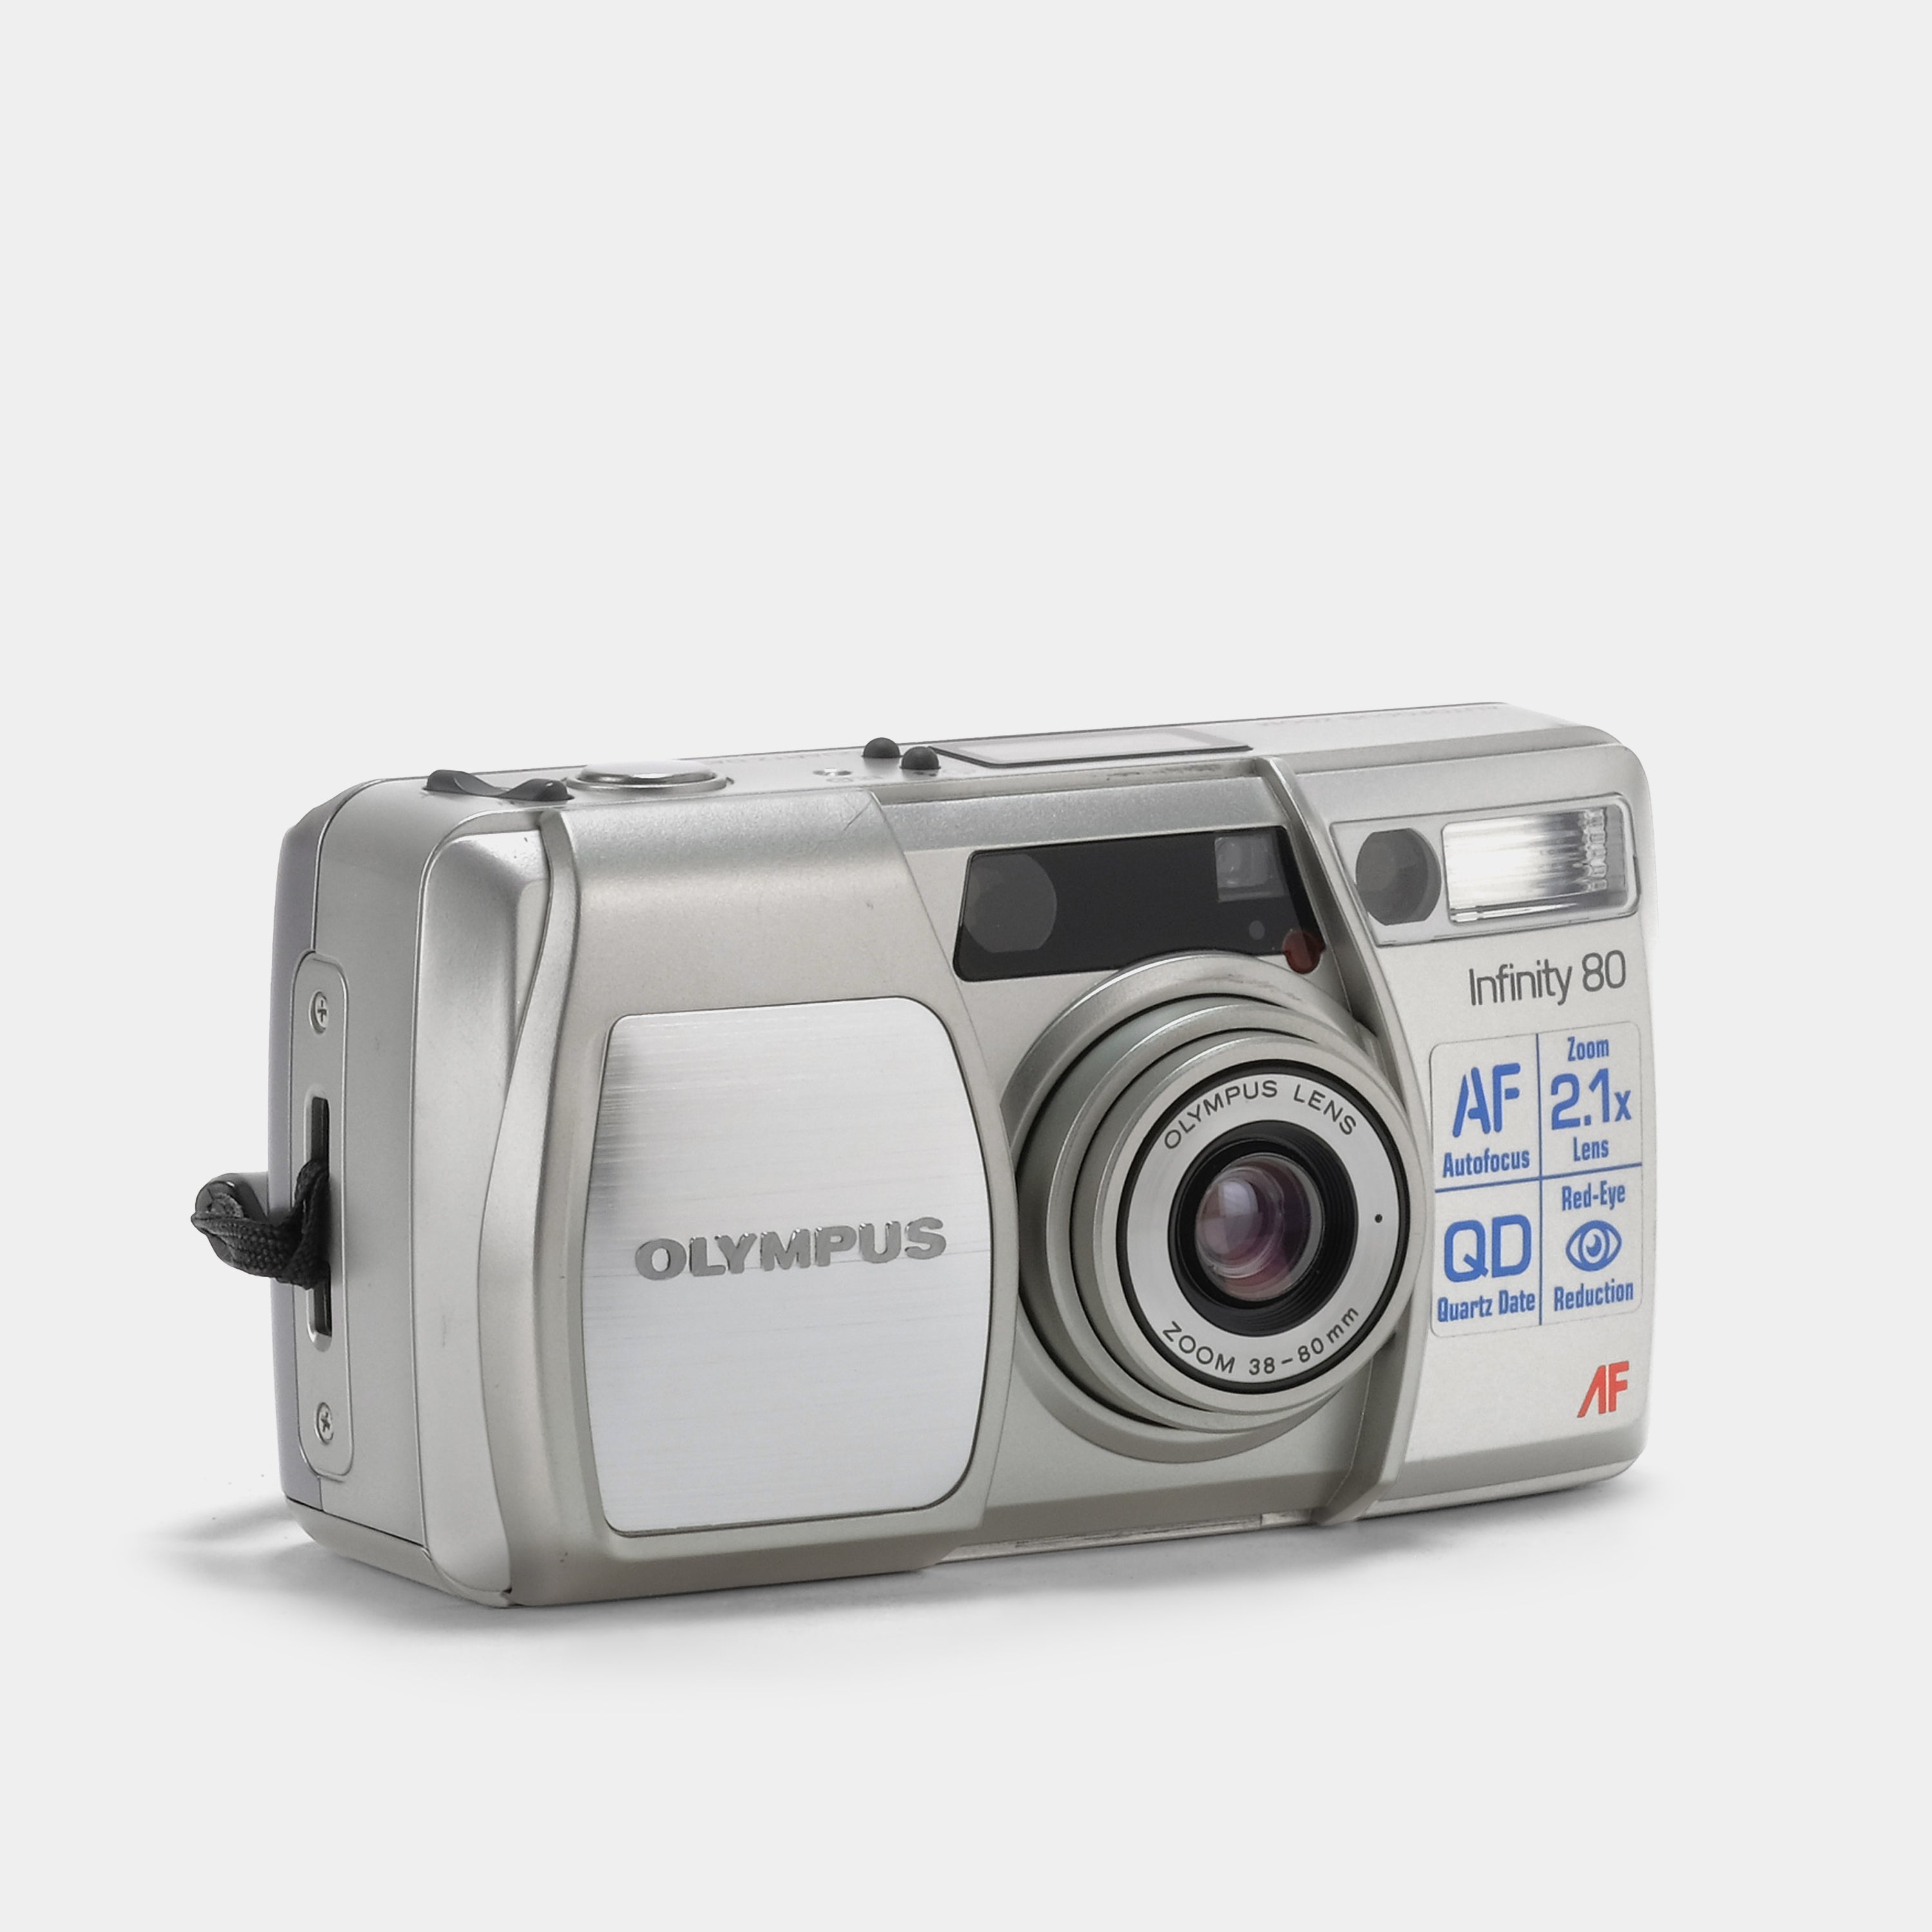 Olympus ∞ Infinity 80 35mm Point and Shoot Film Camera